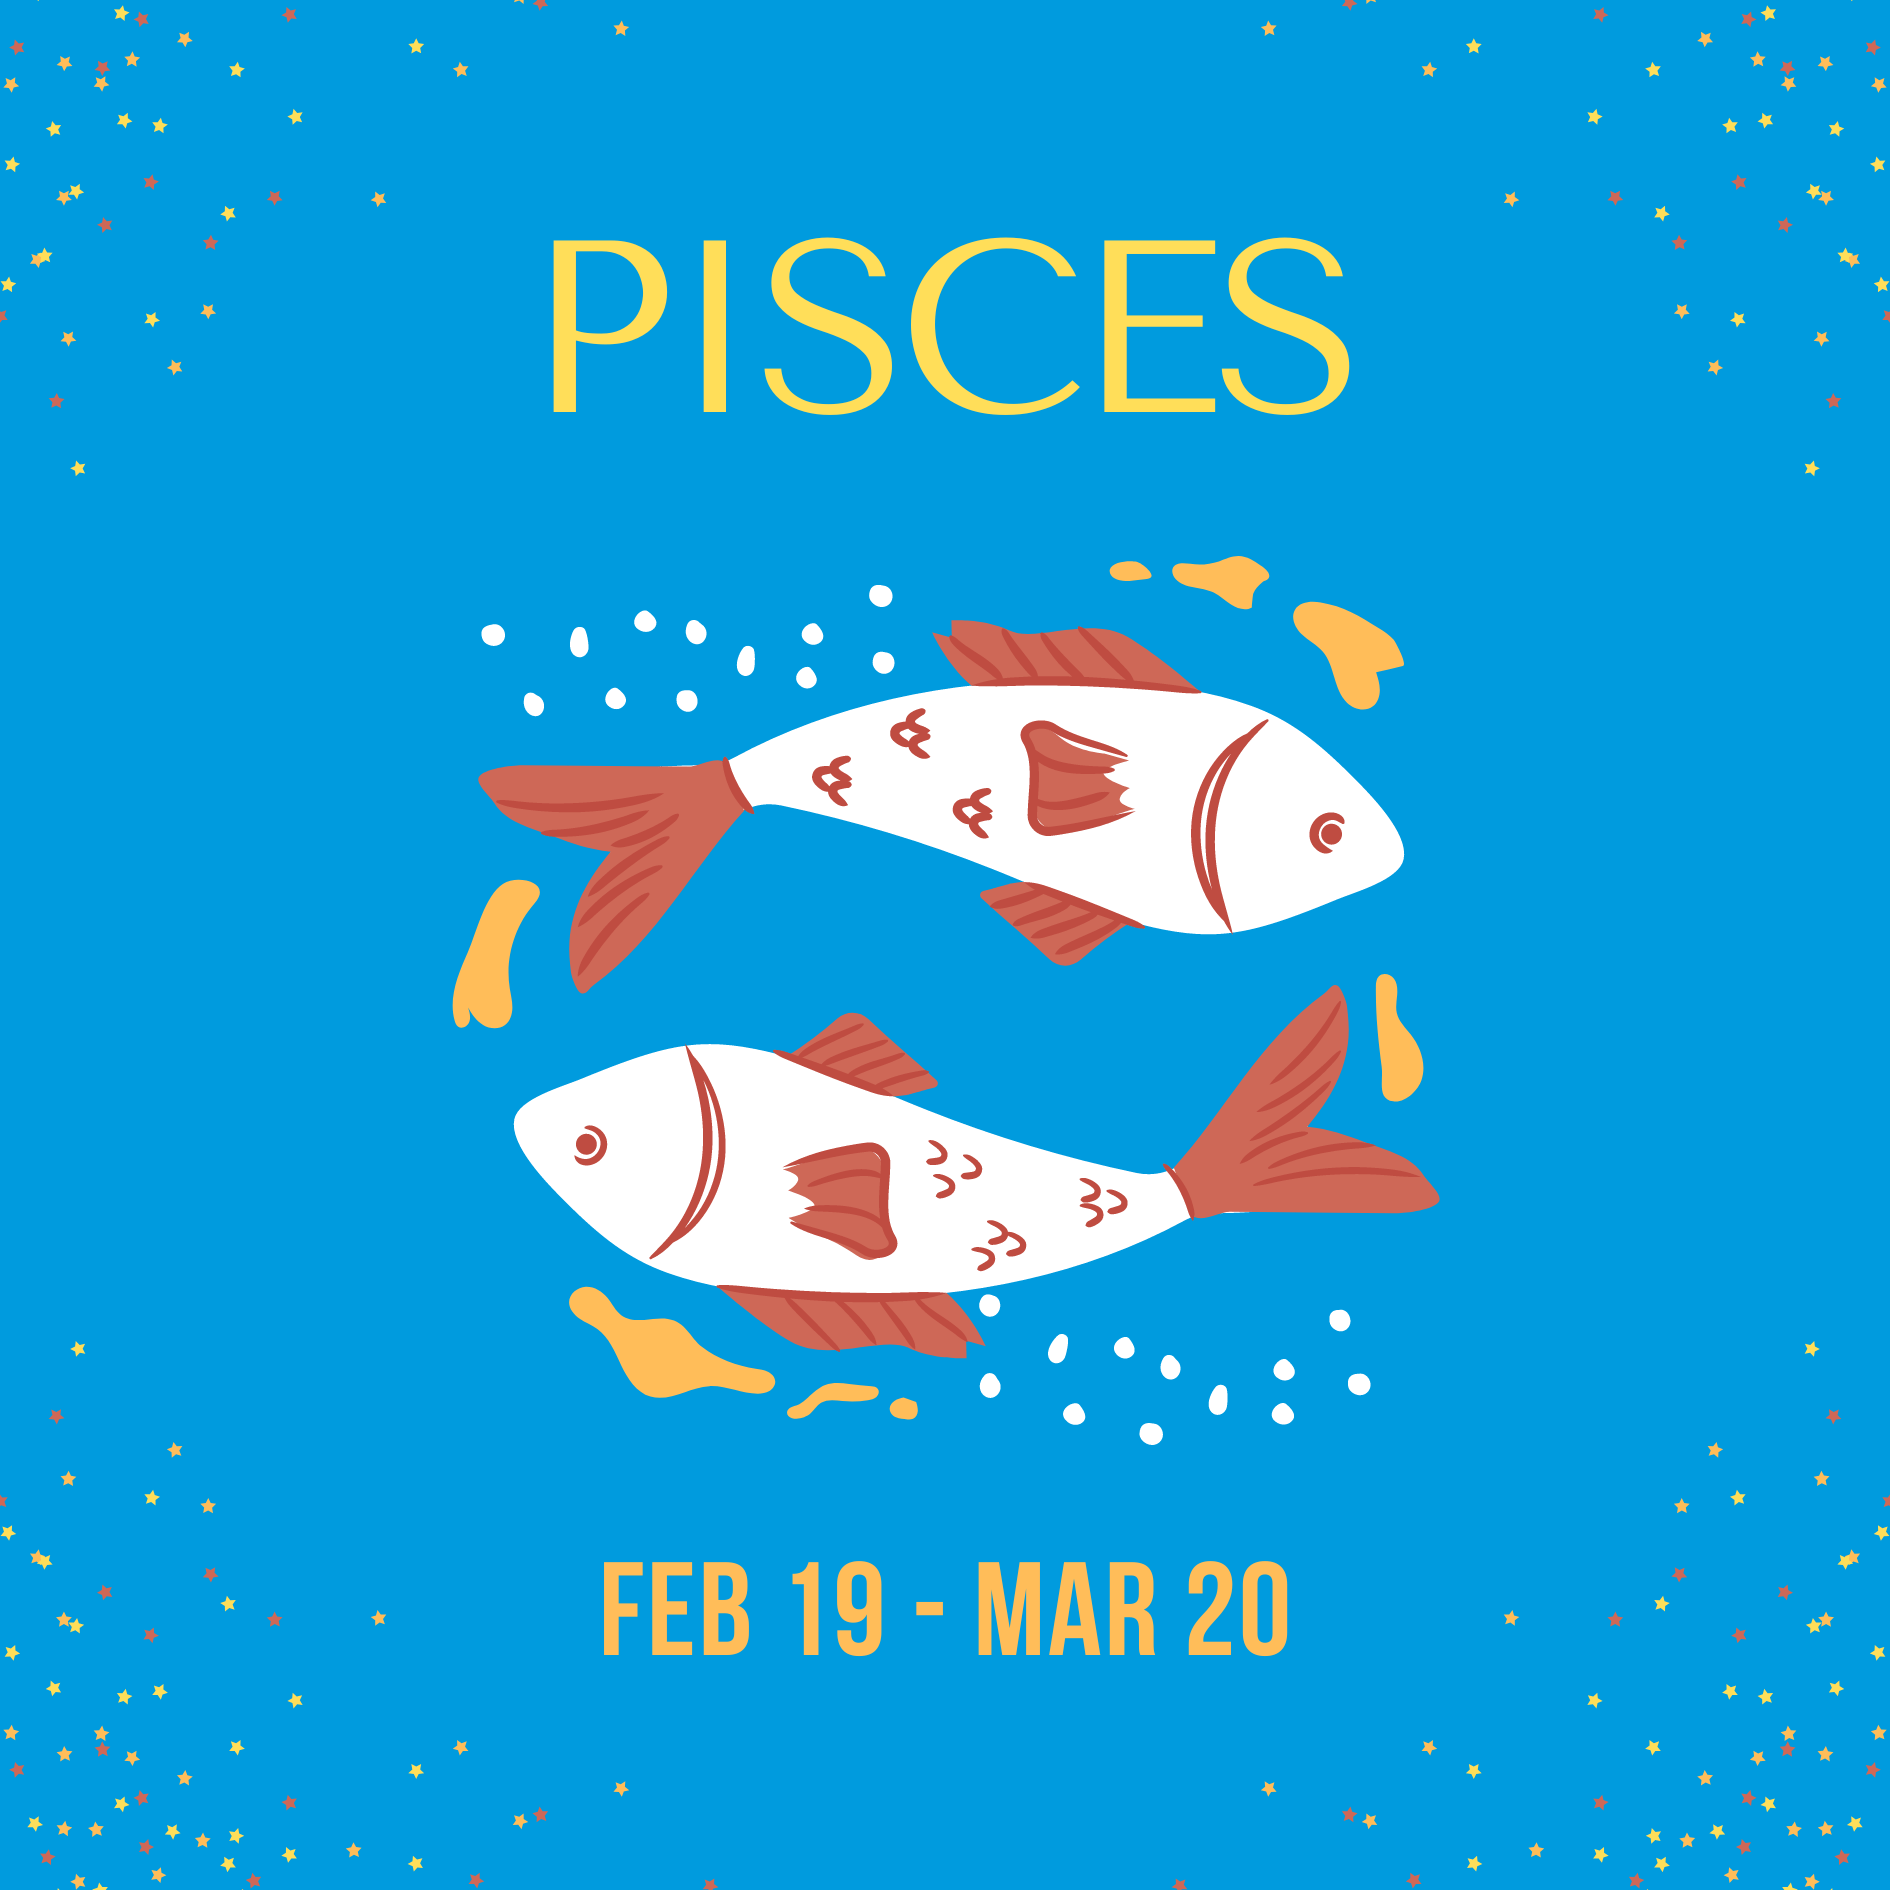 Pisces: February 19 - March 20